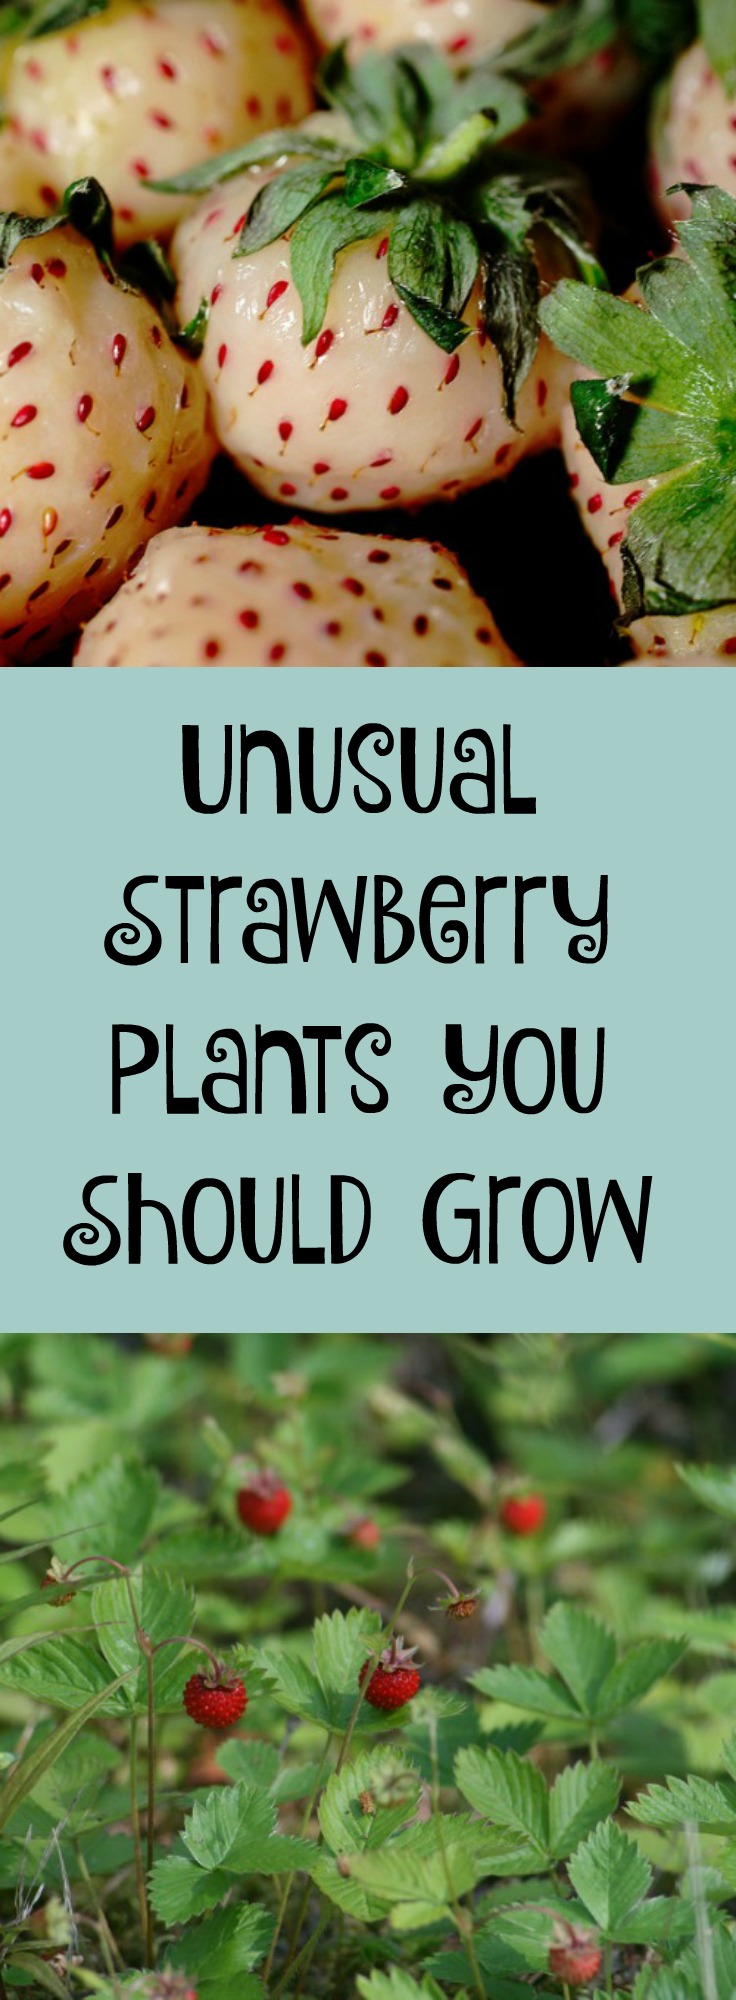 Try these unusual strawberry plants in your landscape this year!